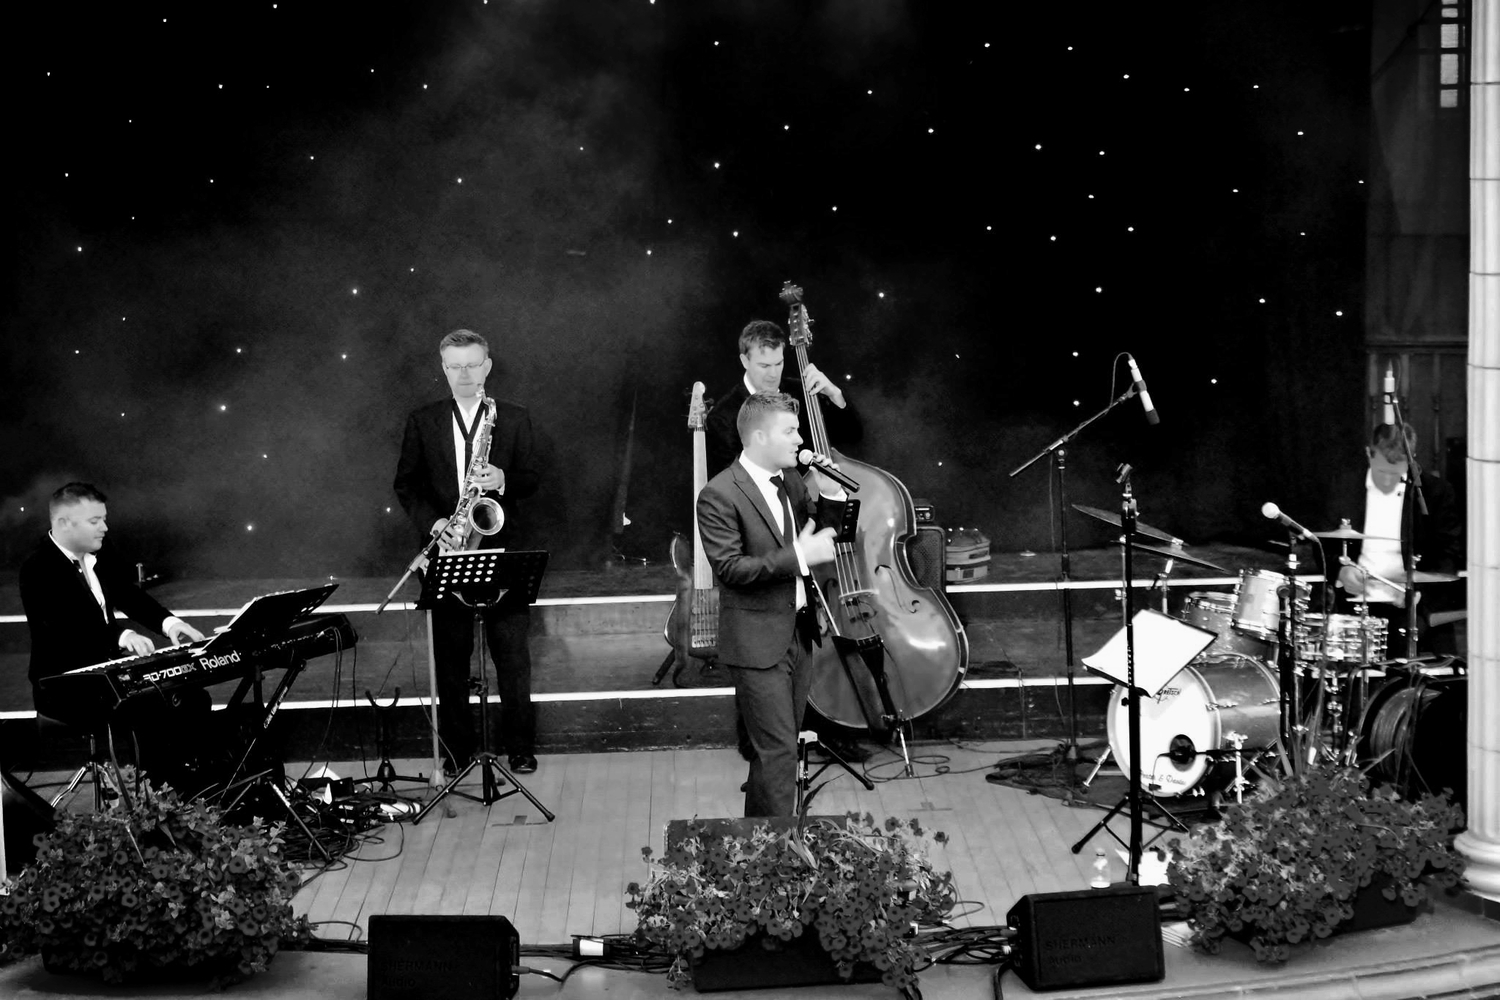 Hire a swing band